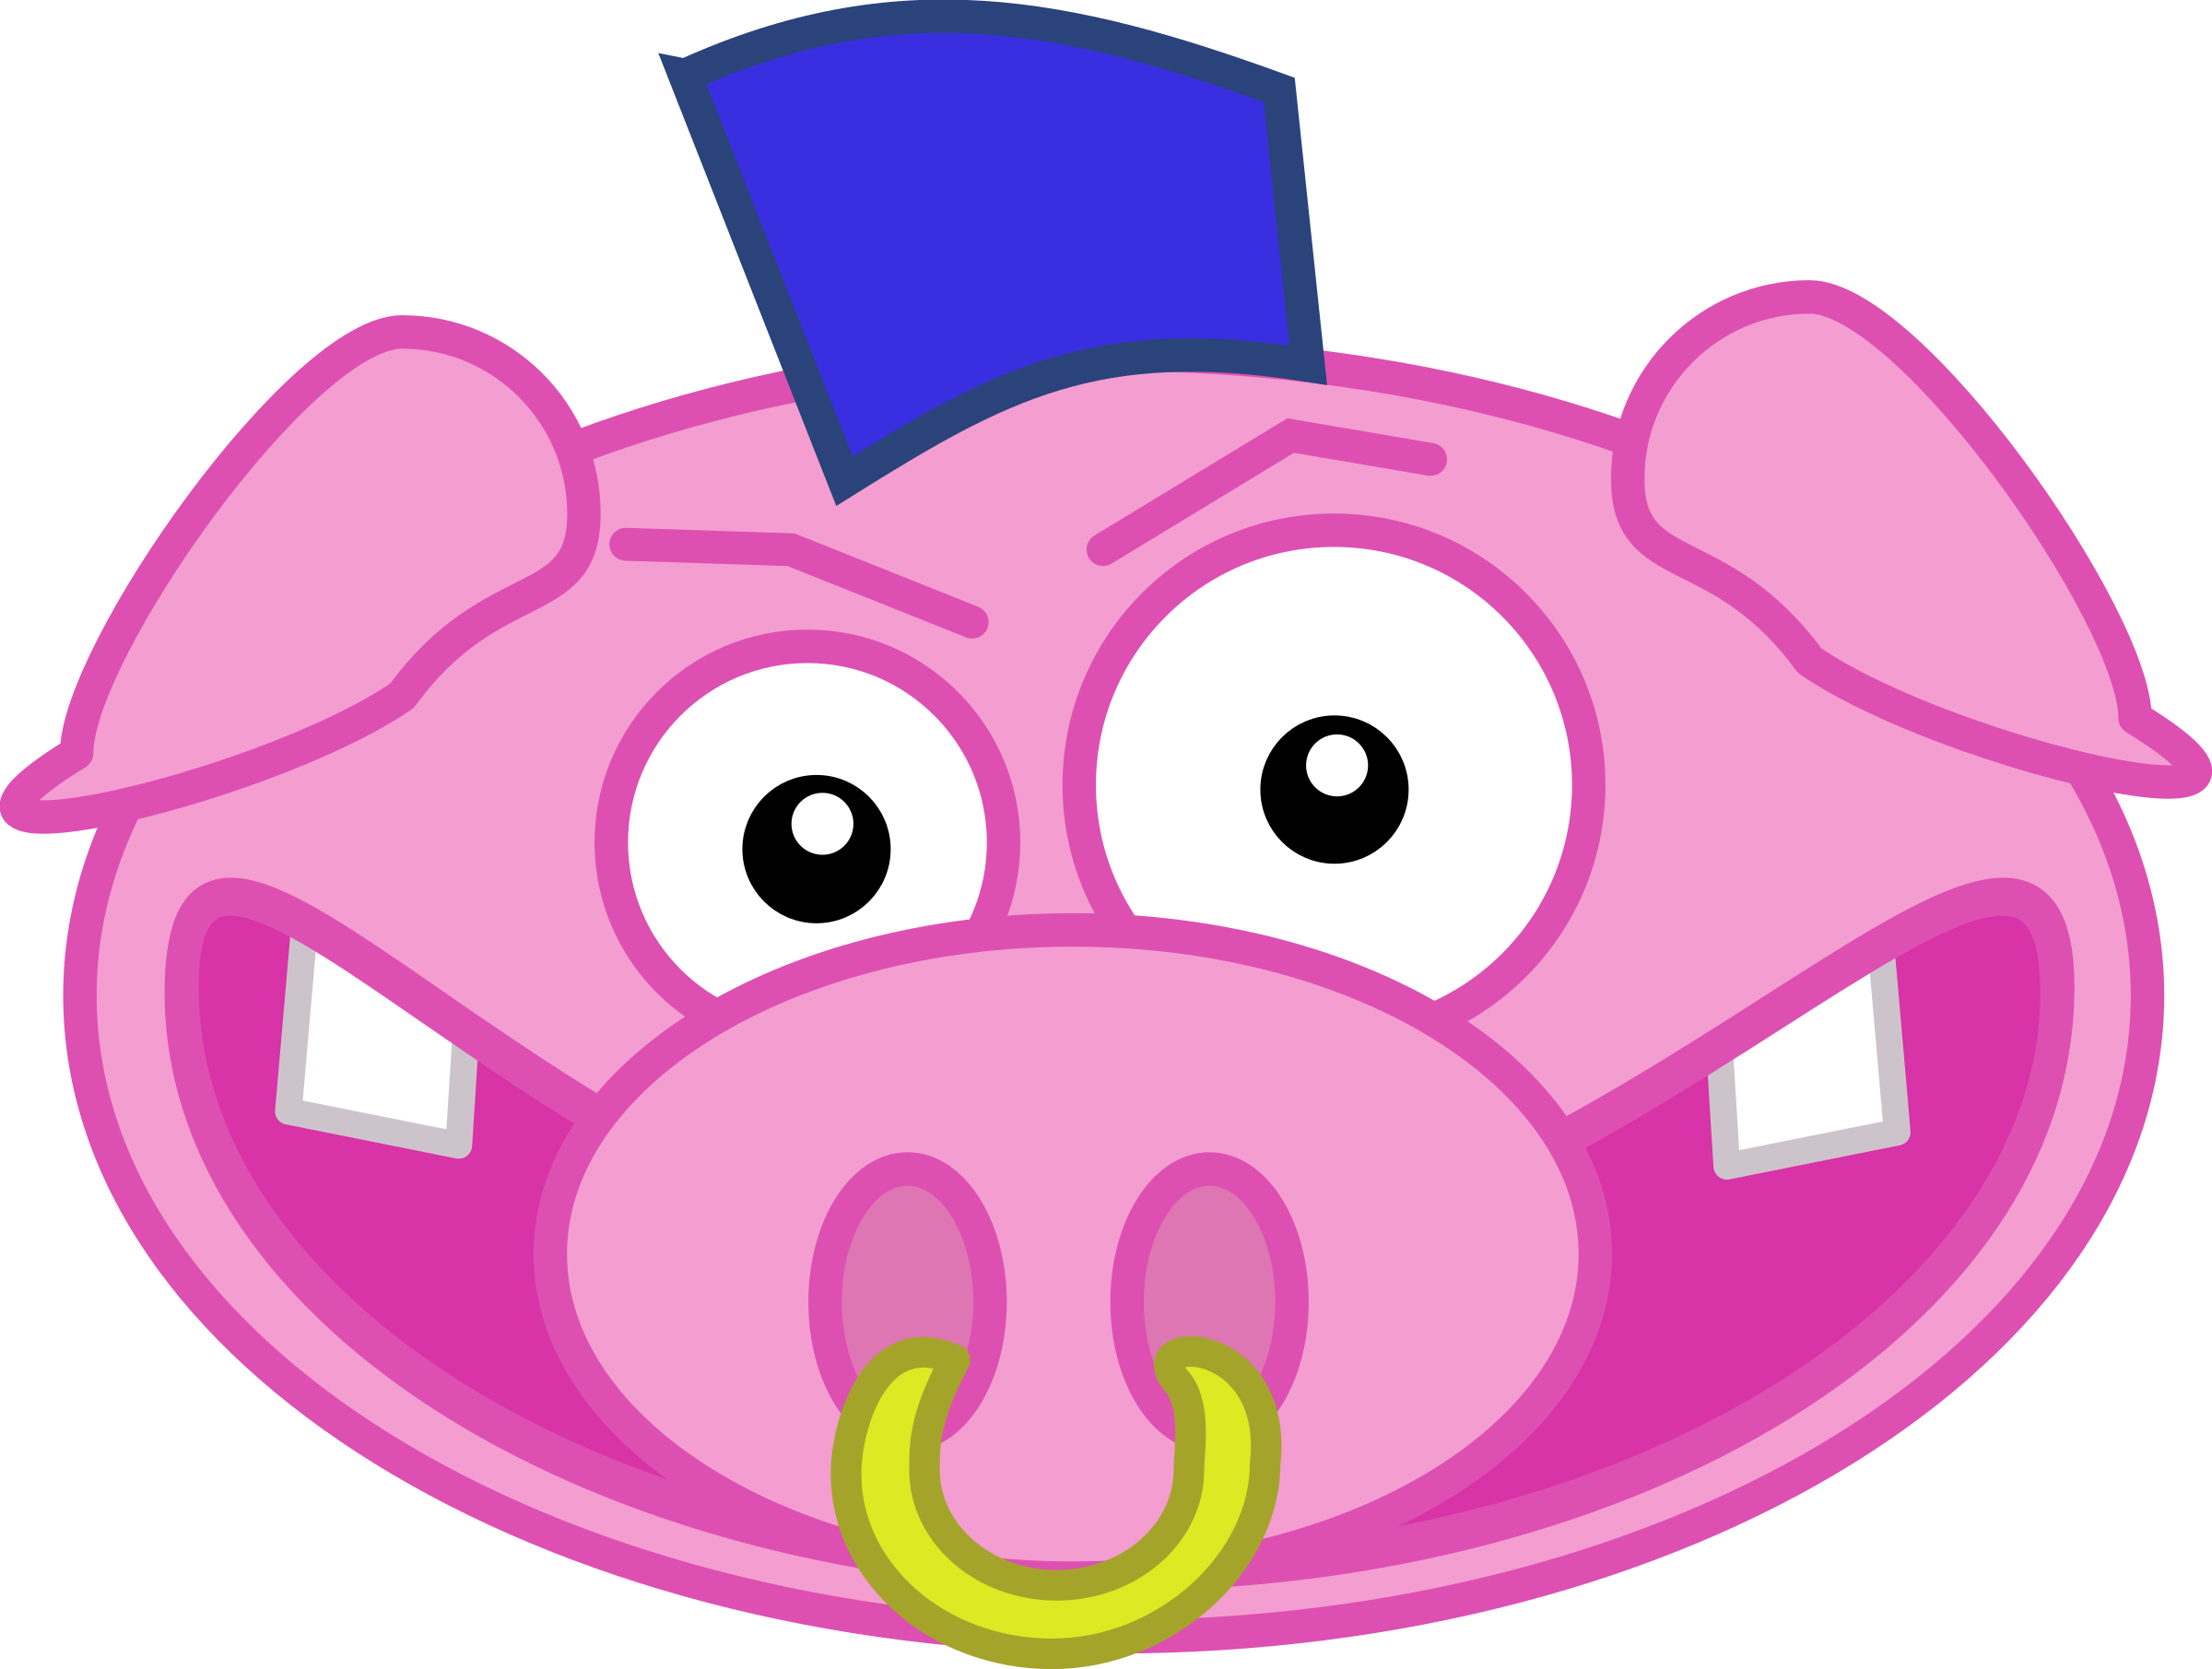 Punk icons png free. Clipart pig female pig